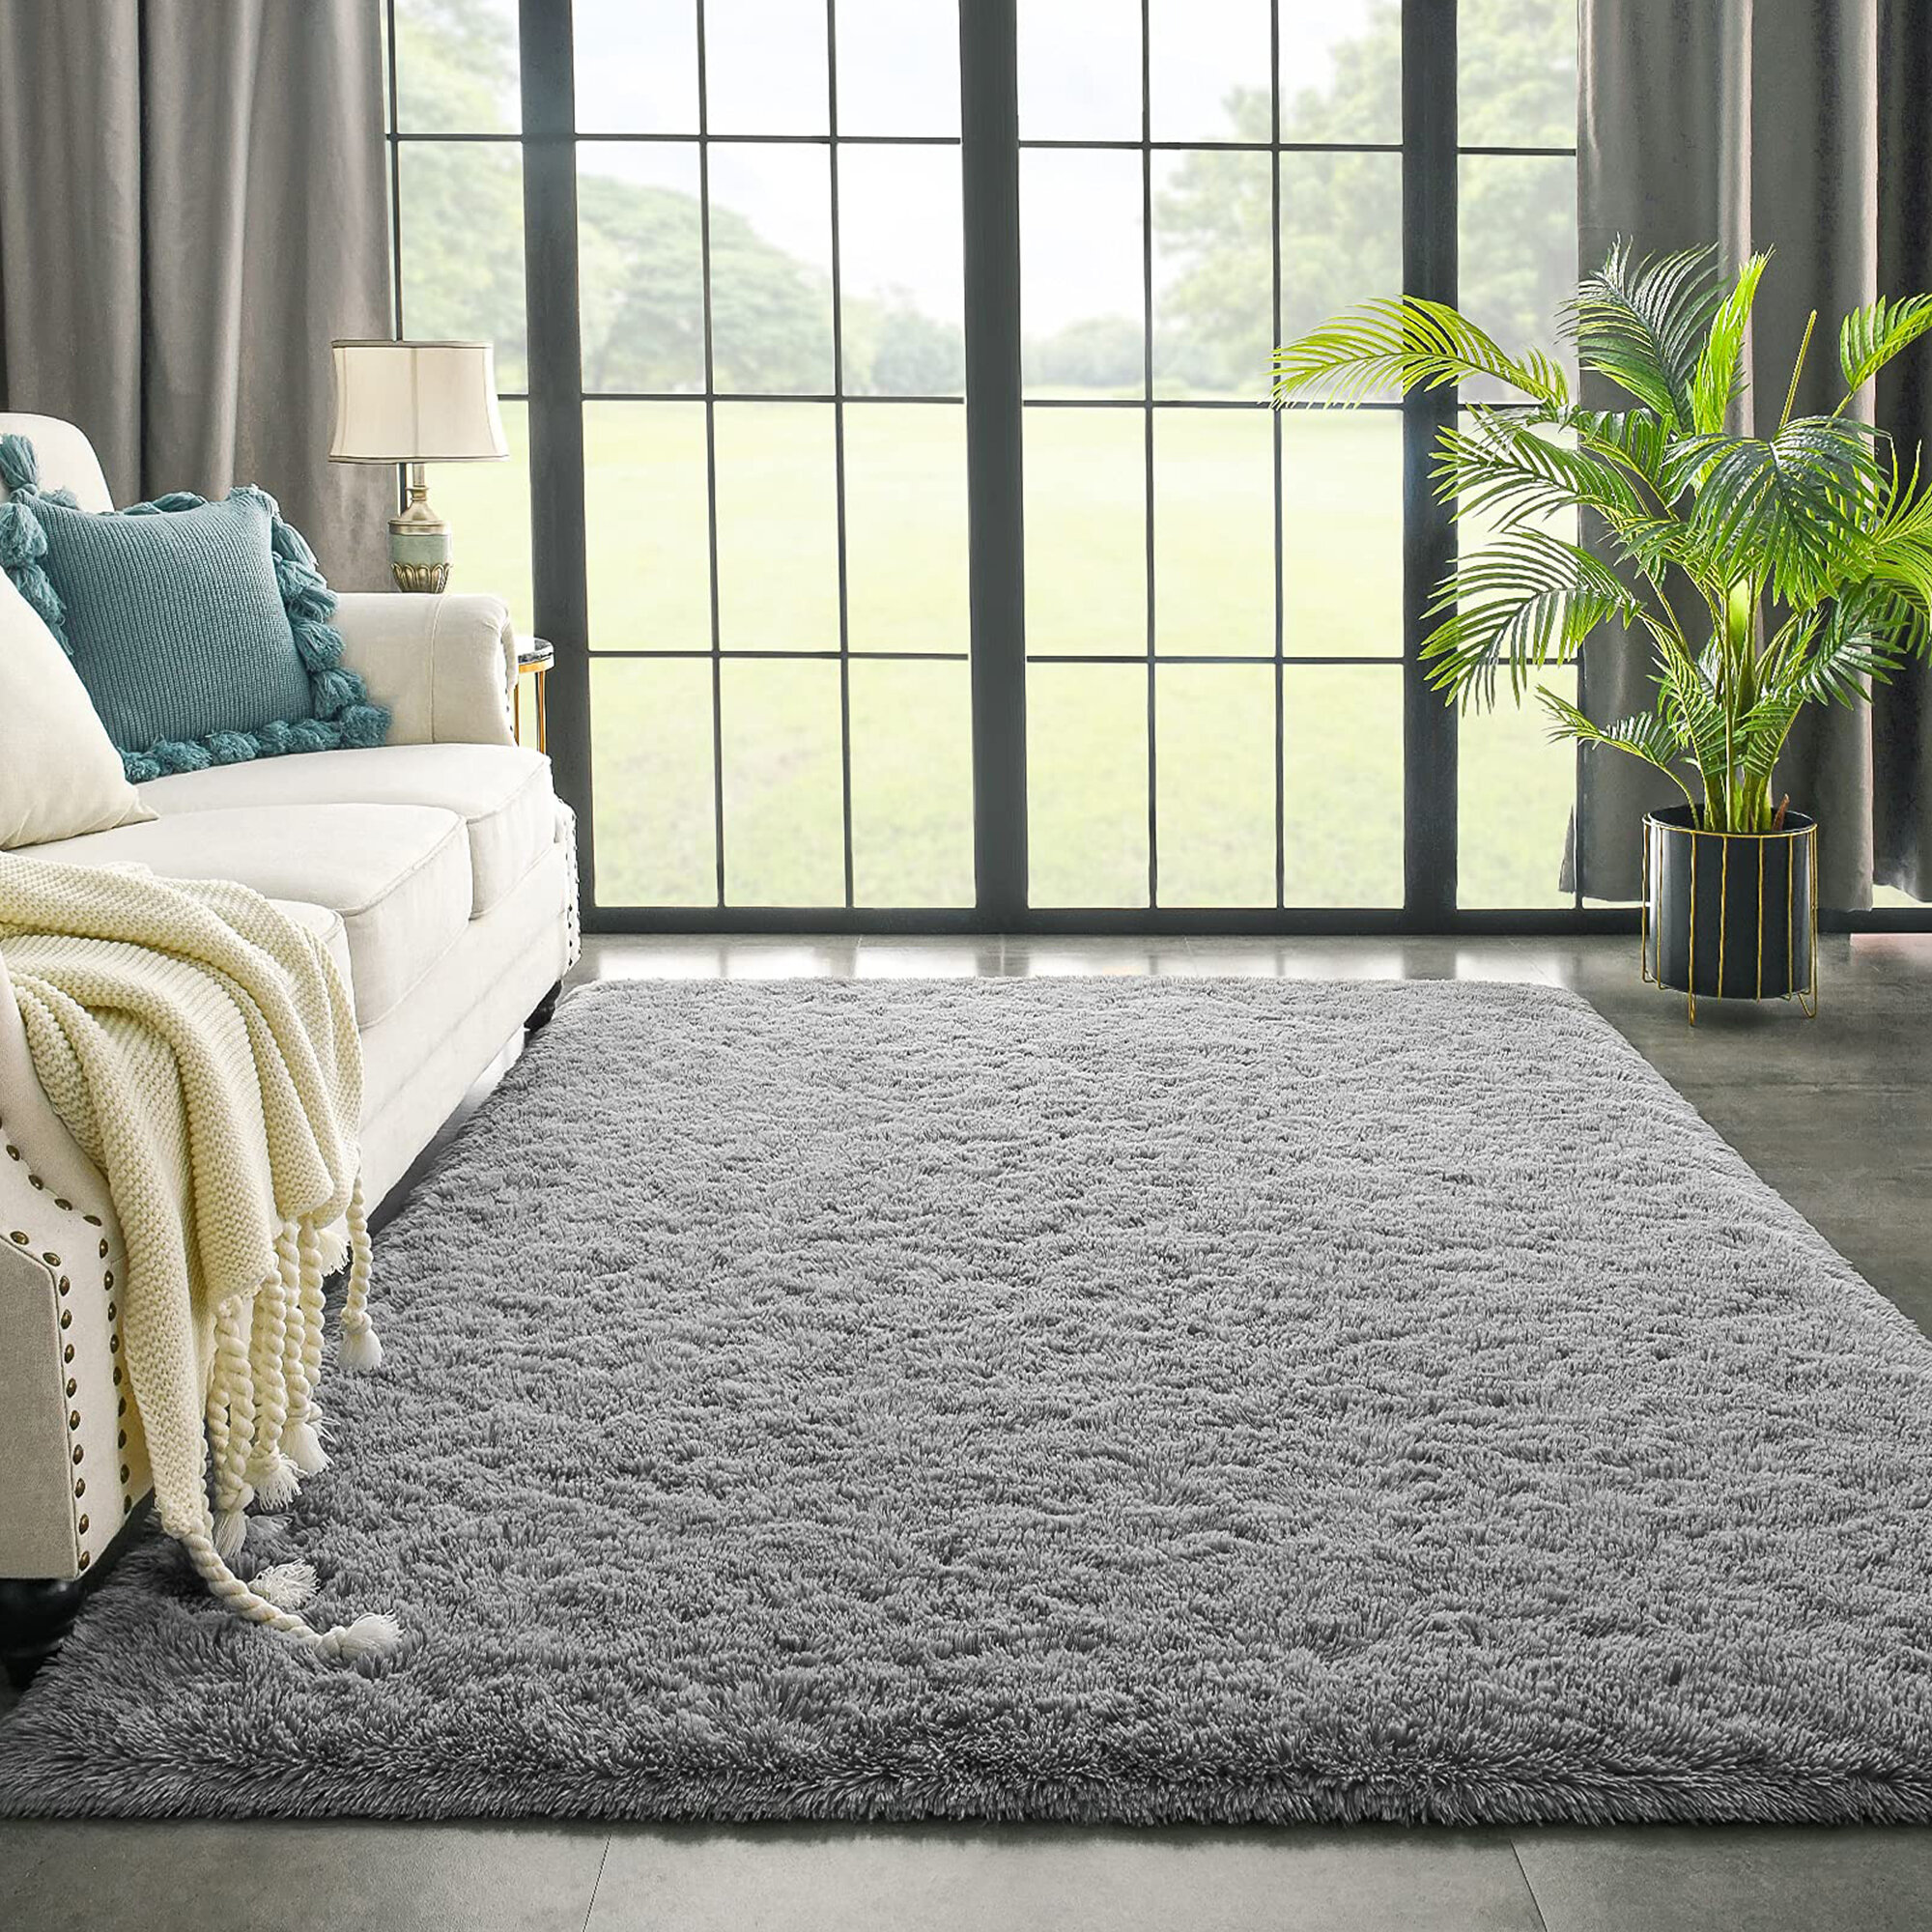 Floor Area Rugs Shag Machine Washable Solid Textured Skid-Resistant Rectangle 